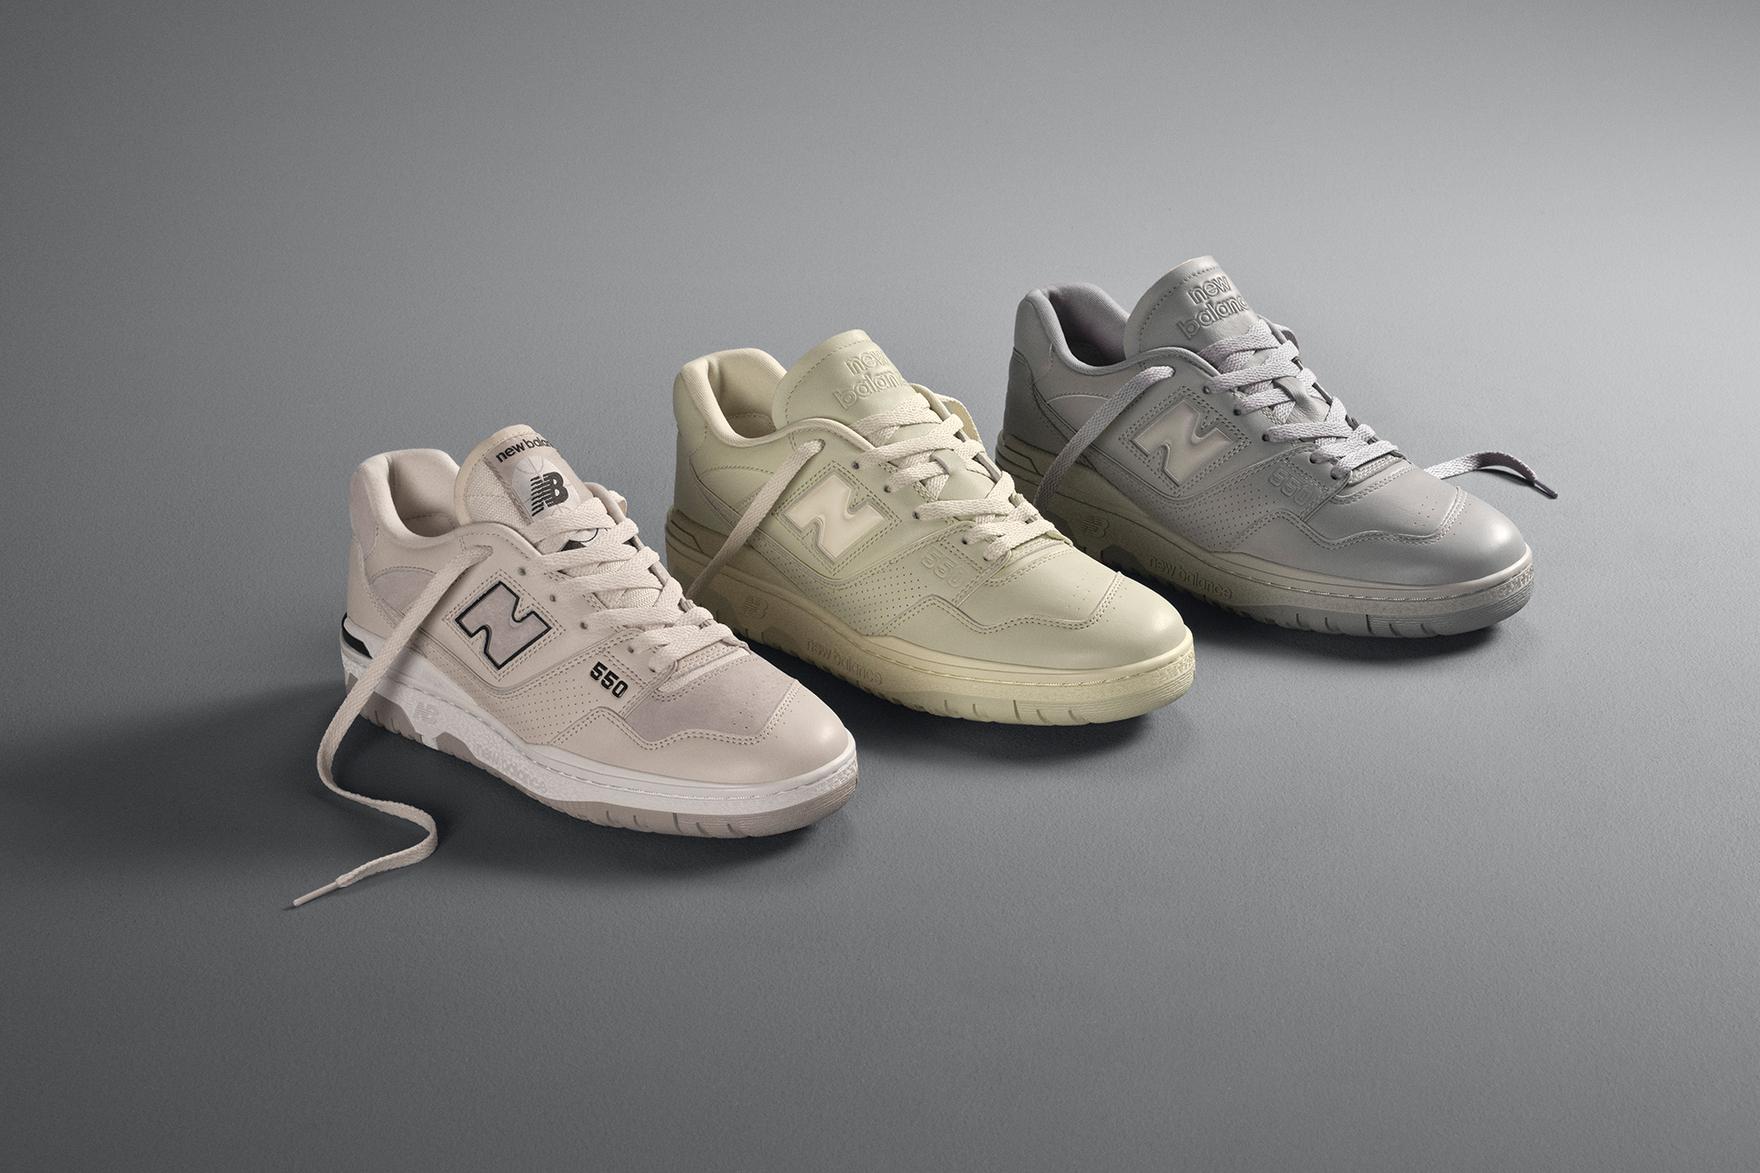 New Balance and Foot Locker Forecast 550s for Grey Day